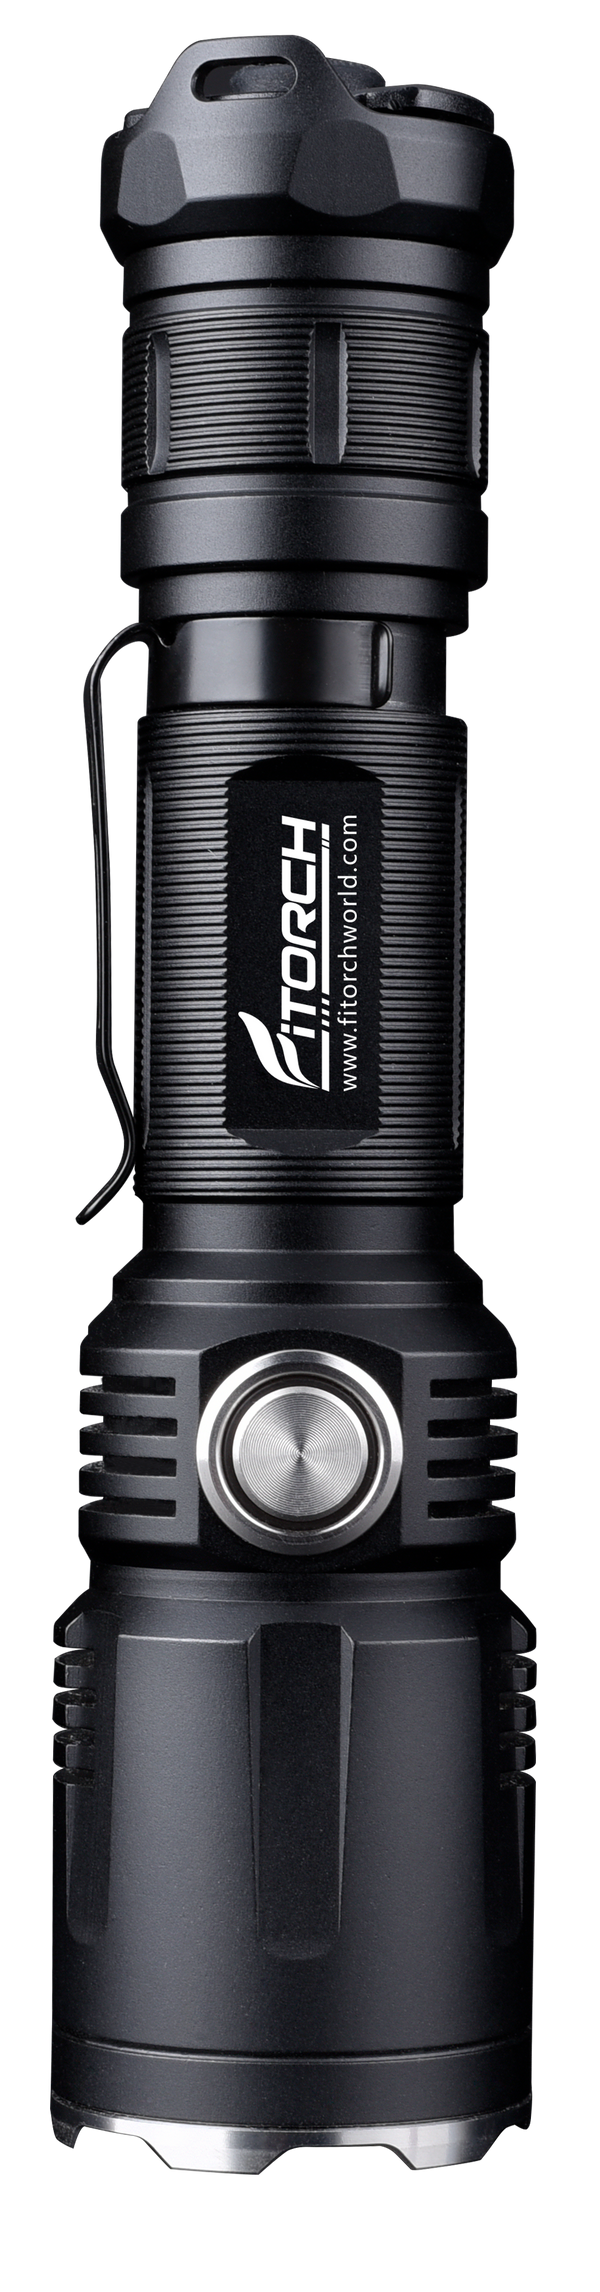 Fitorch M30R TACTICAL AND NORMAL ILLUMINATION COMBINED フィトーチ タクティカル LEDフラッシュライト 式充電 懐中電灯 1800ルーメン